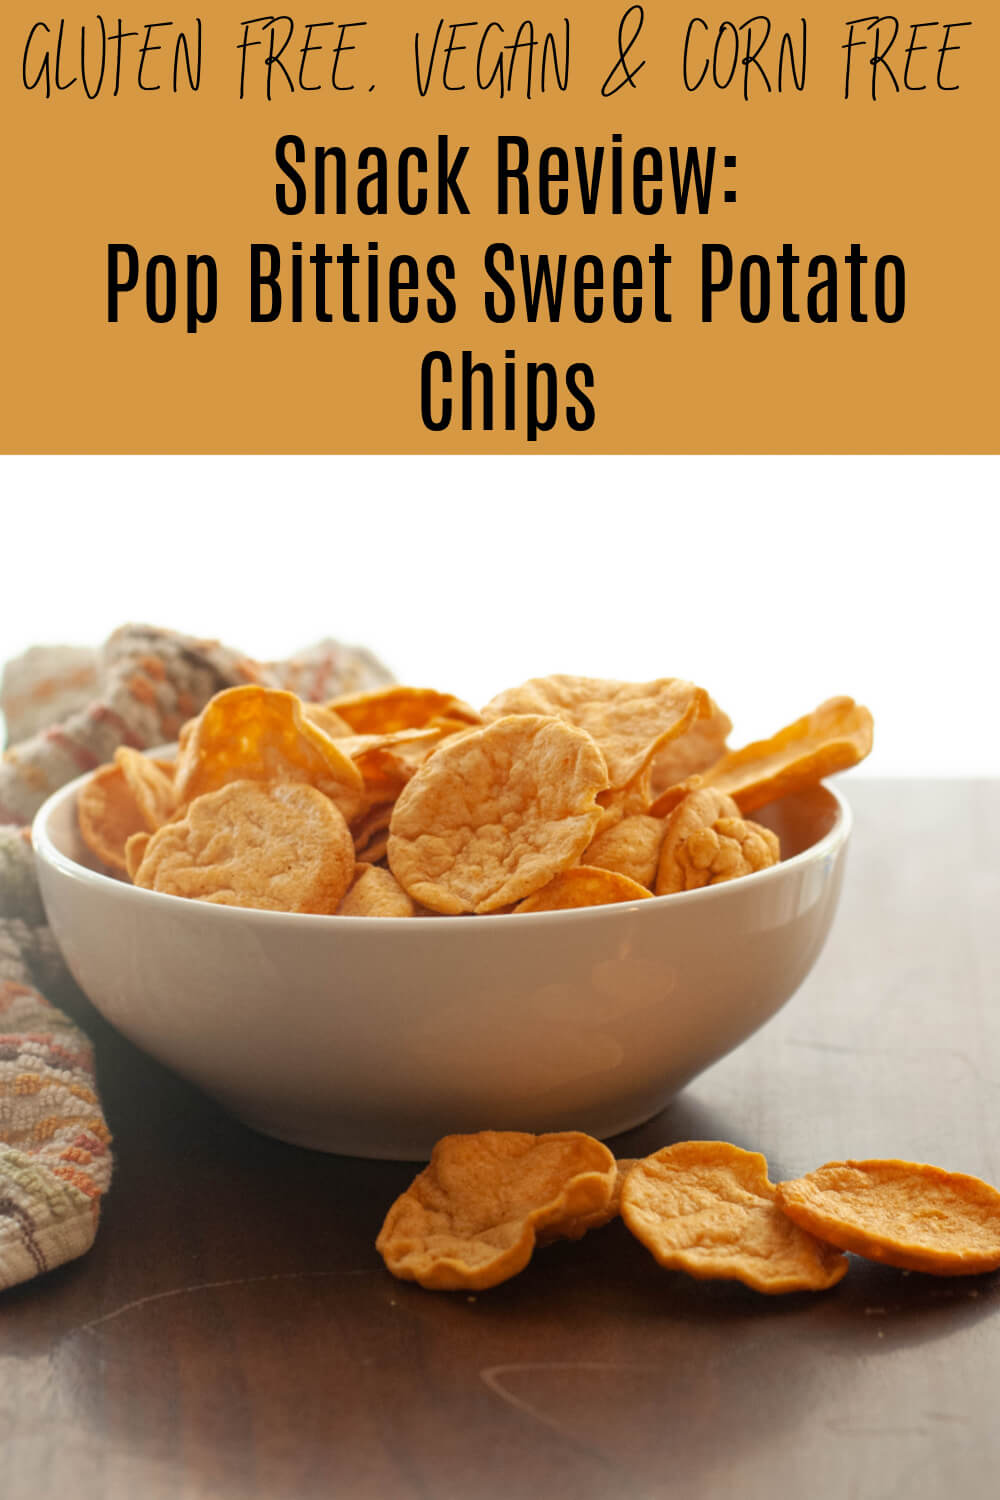 pop-bitties-sweet-potato-chip-information-by-allergy-awesomeness